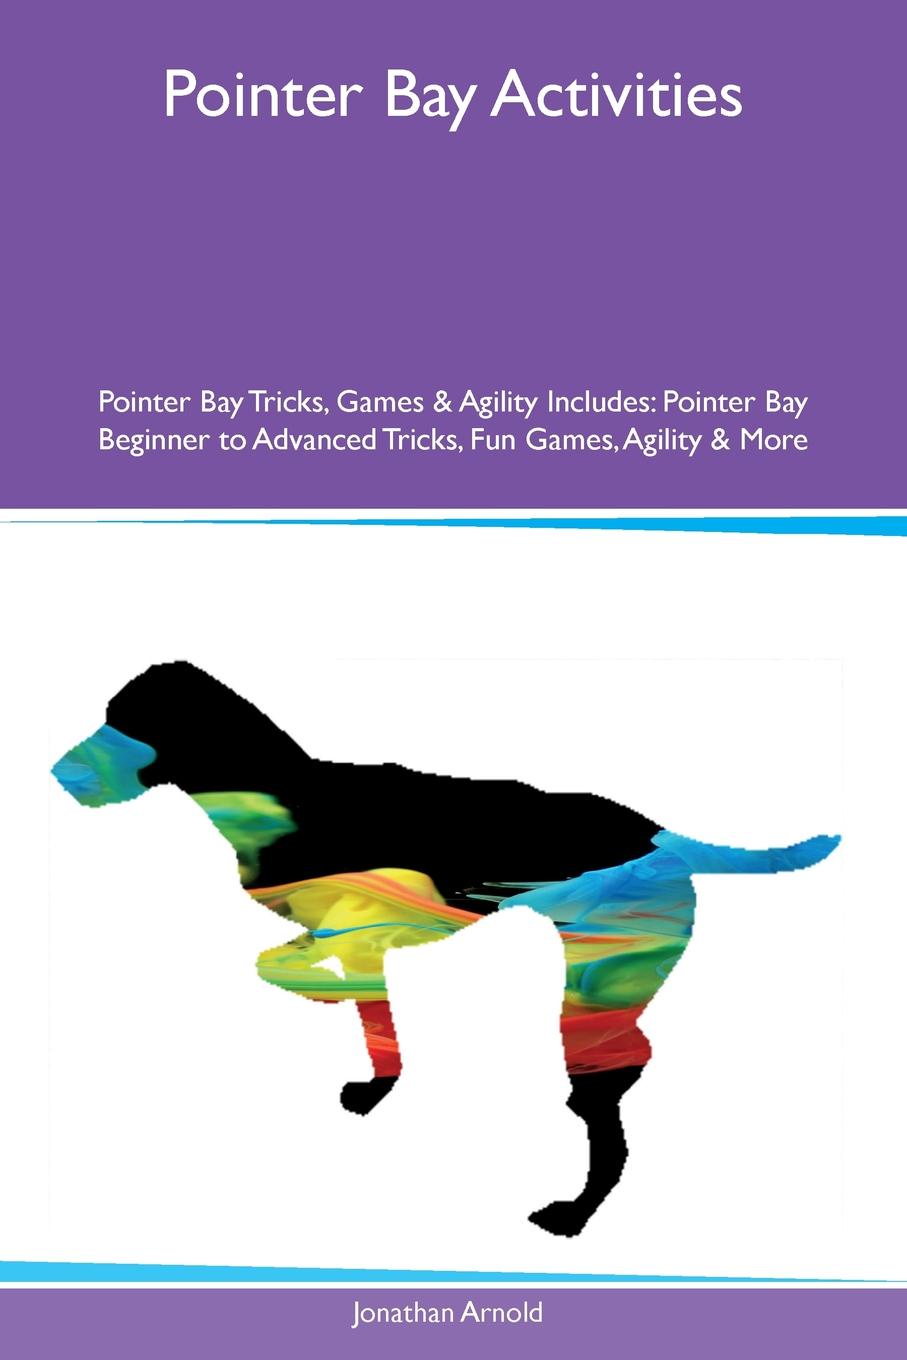 Pointer Bay Activities Pointer Bay Tricks, Games & Agility Includes. Pointer Bay Beginner to Advanced Tricks, Fun Games, Agility & More